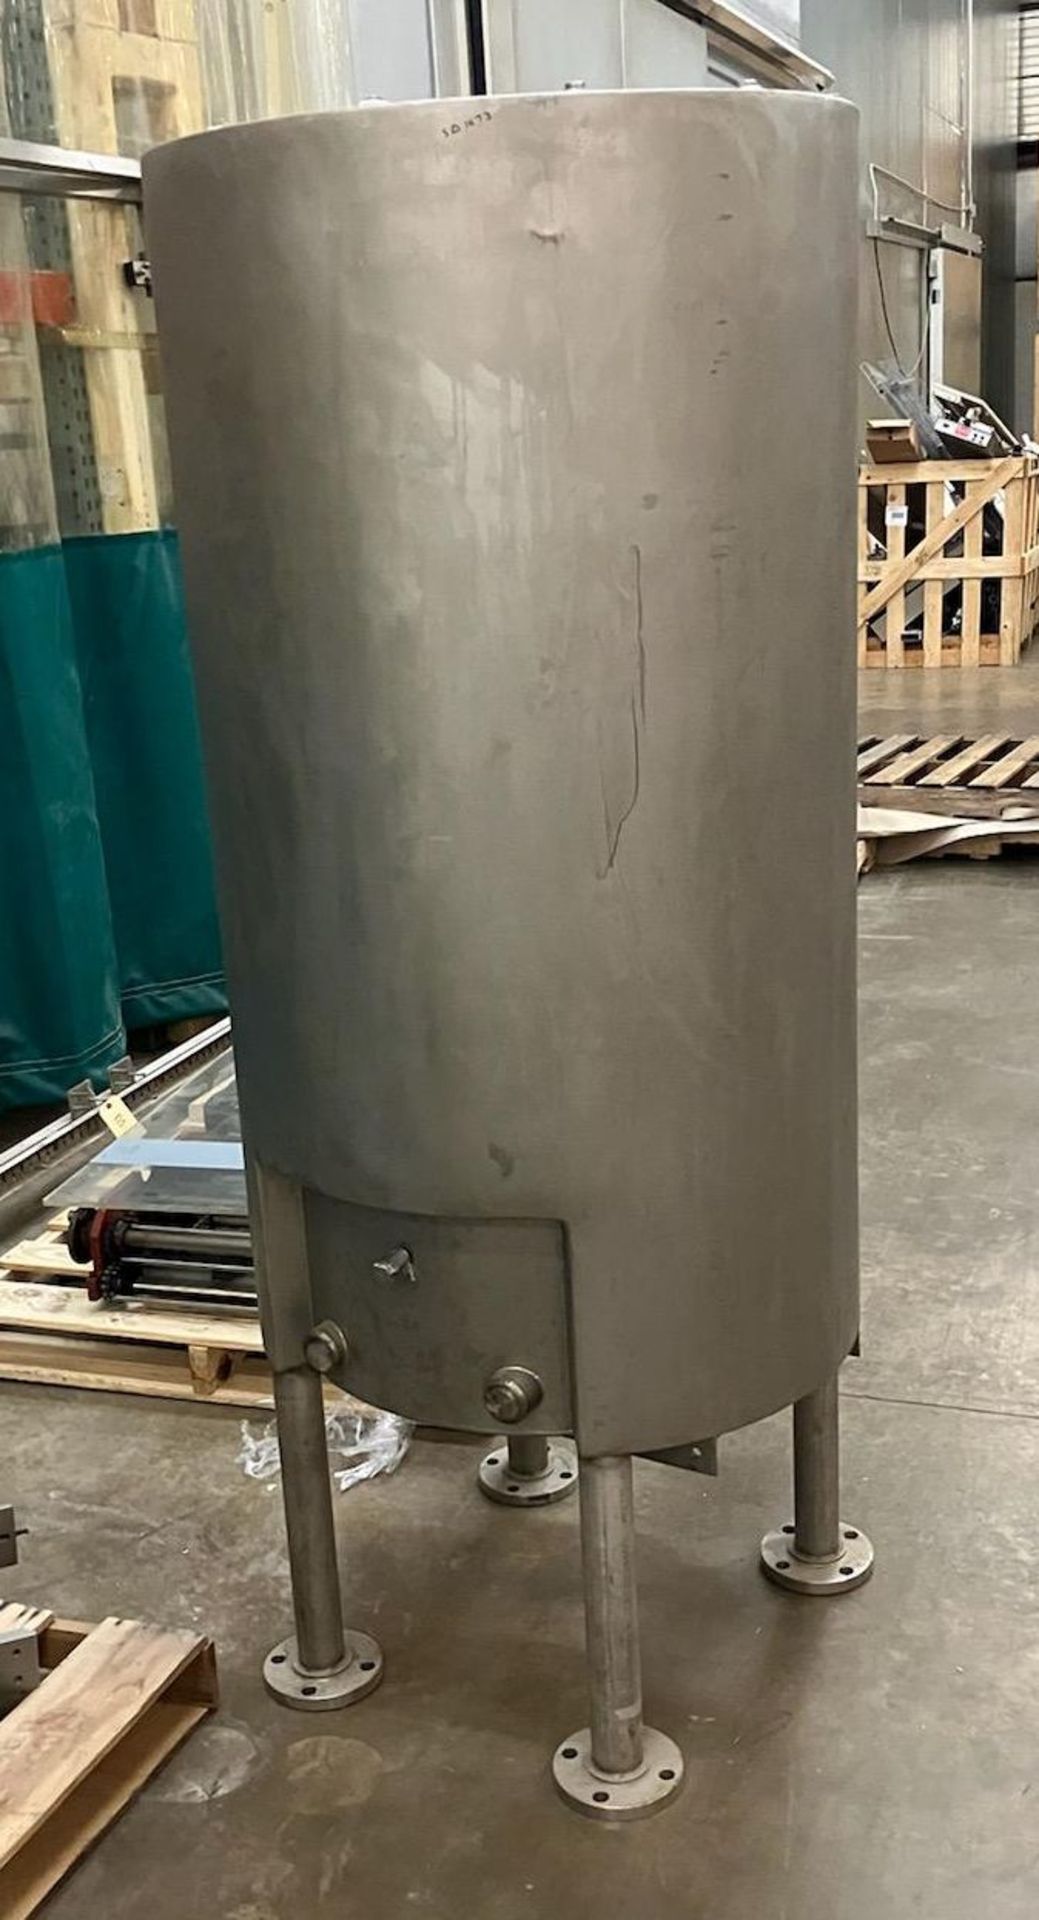 Jacketed Chocolate Holding Tank, 1 1/4" Side Discharge, Tank Height: 55", Stand Hei | Rig Fee $25